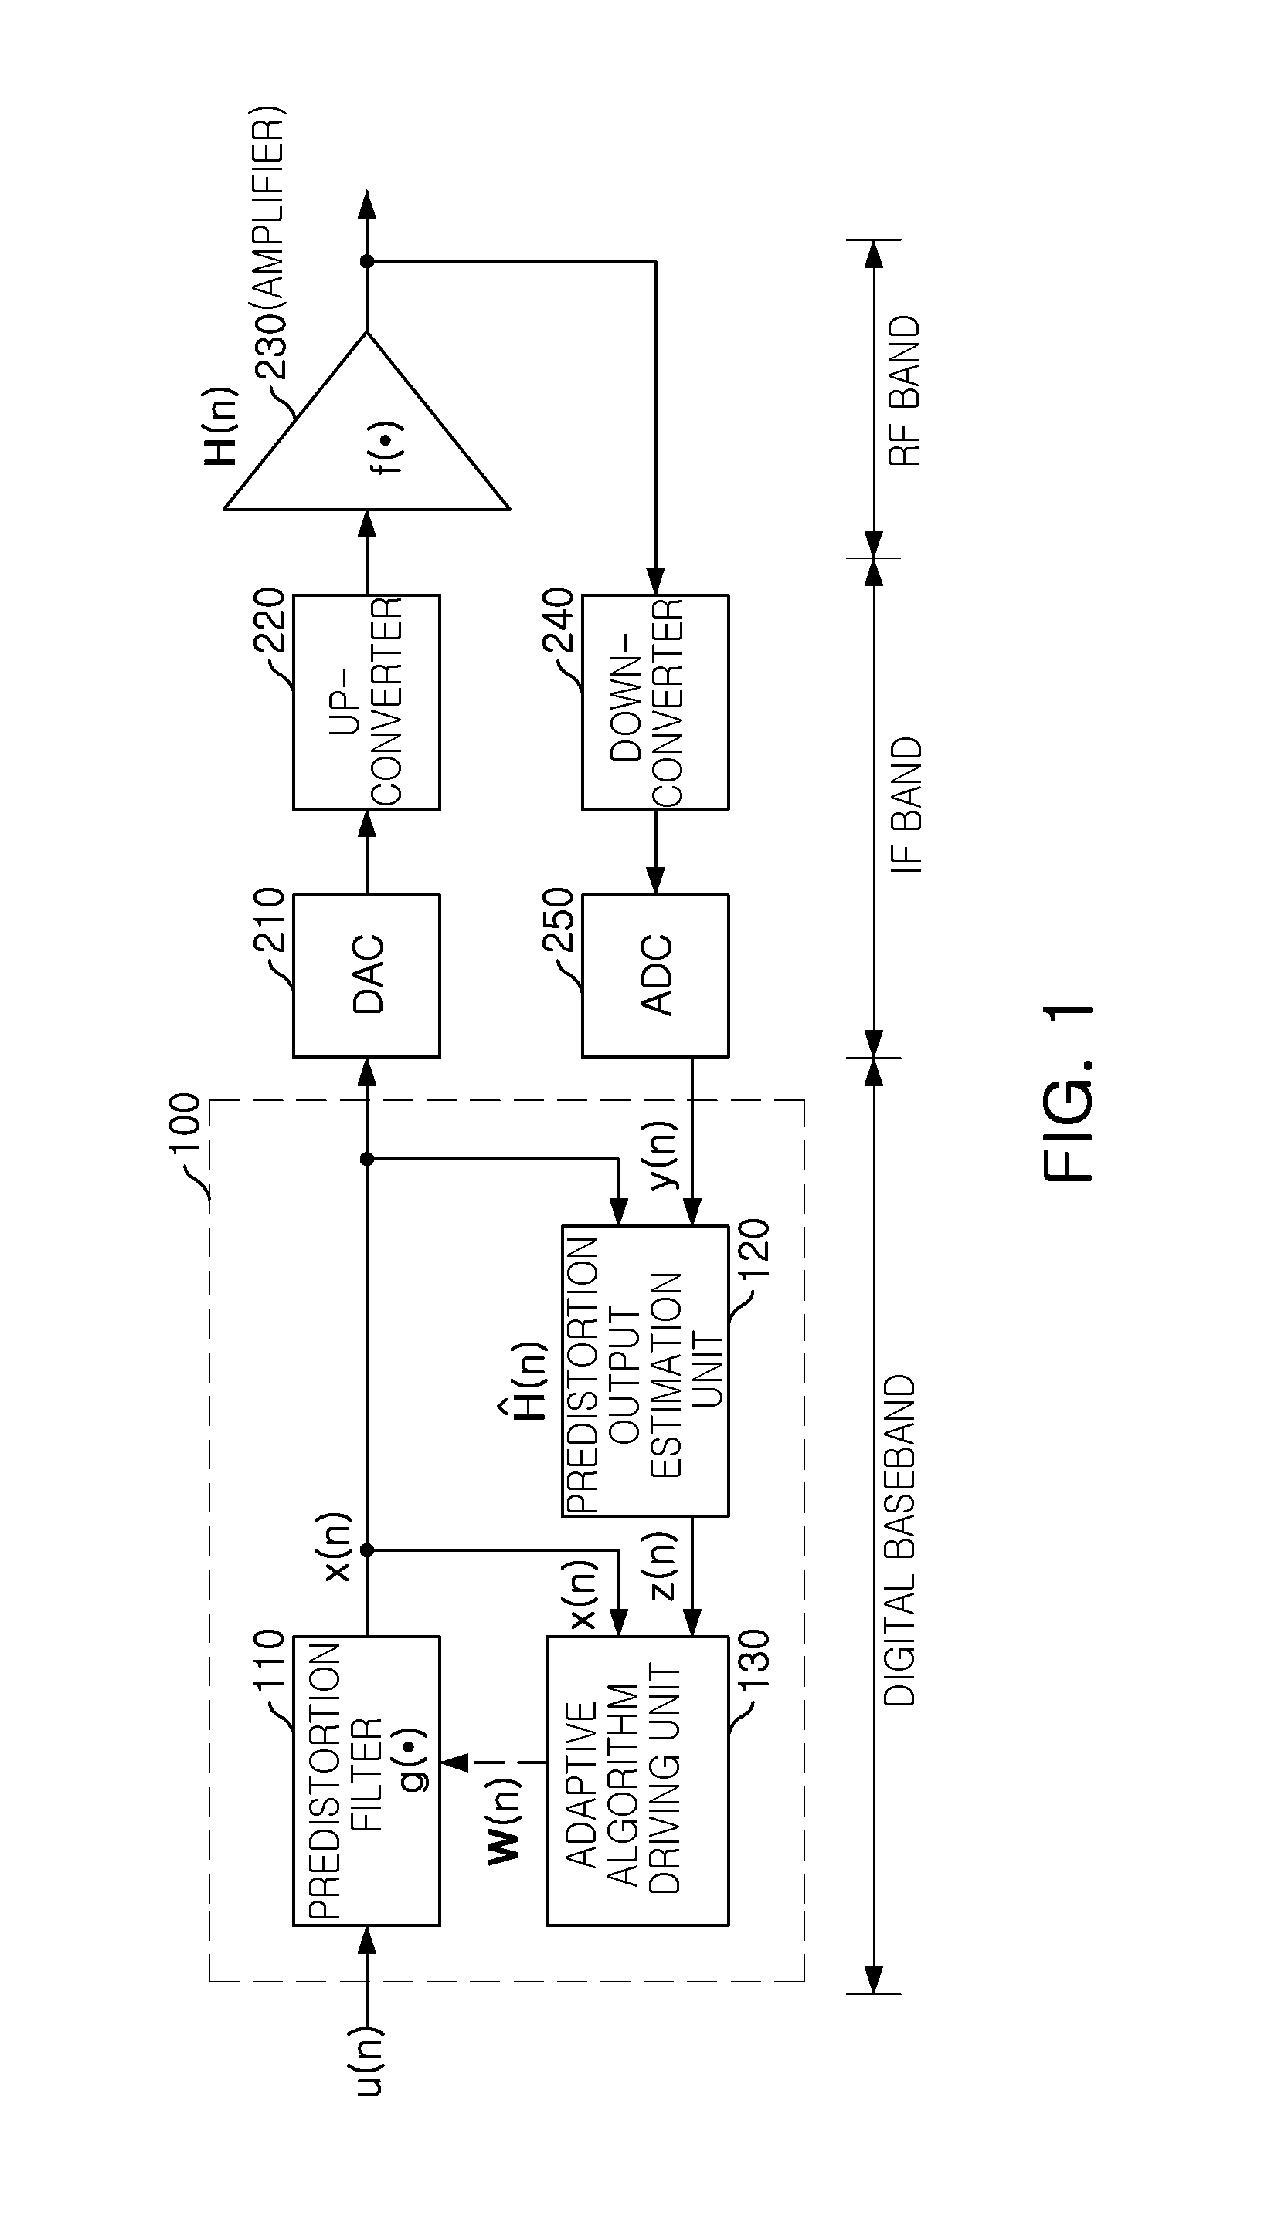 Predistorter for compensating for nonlinear distortion and method thereof